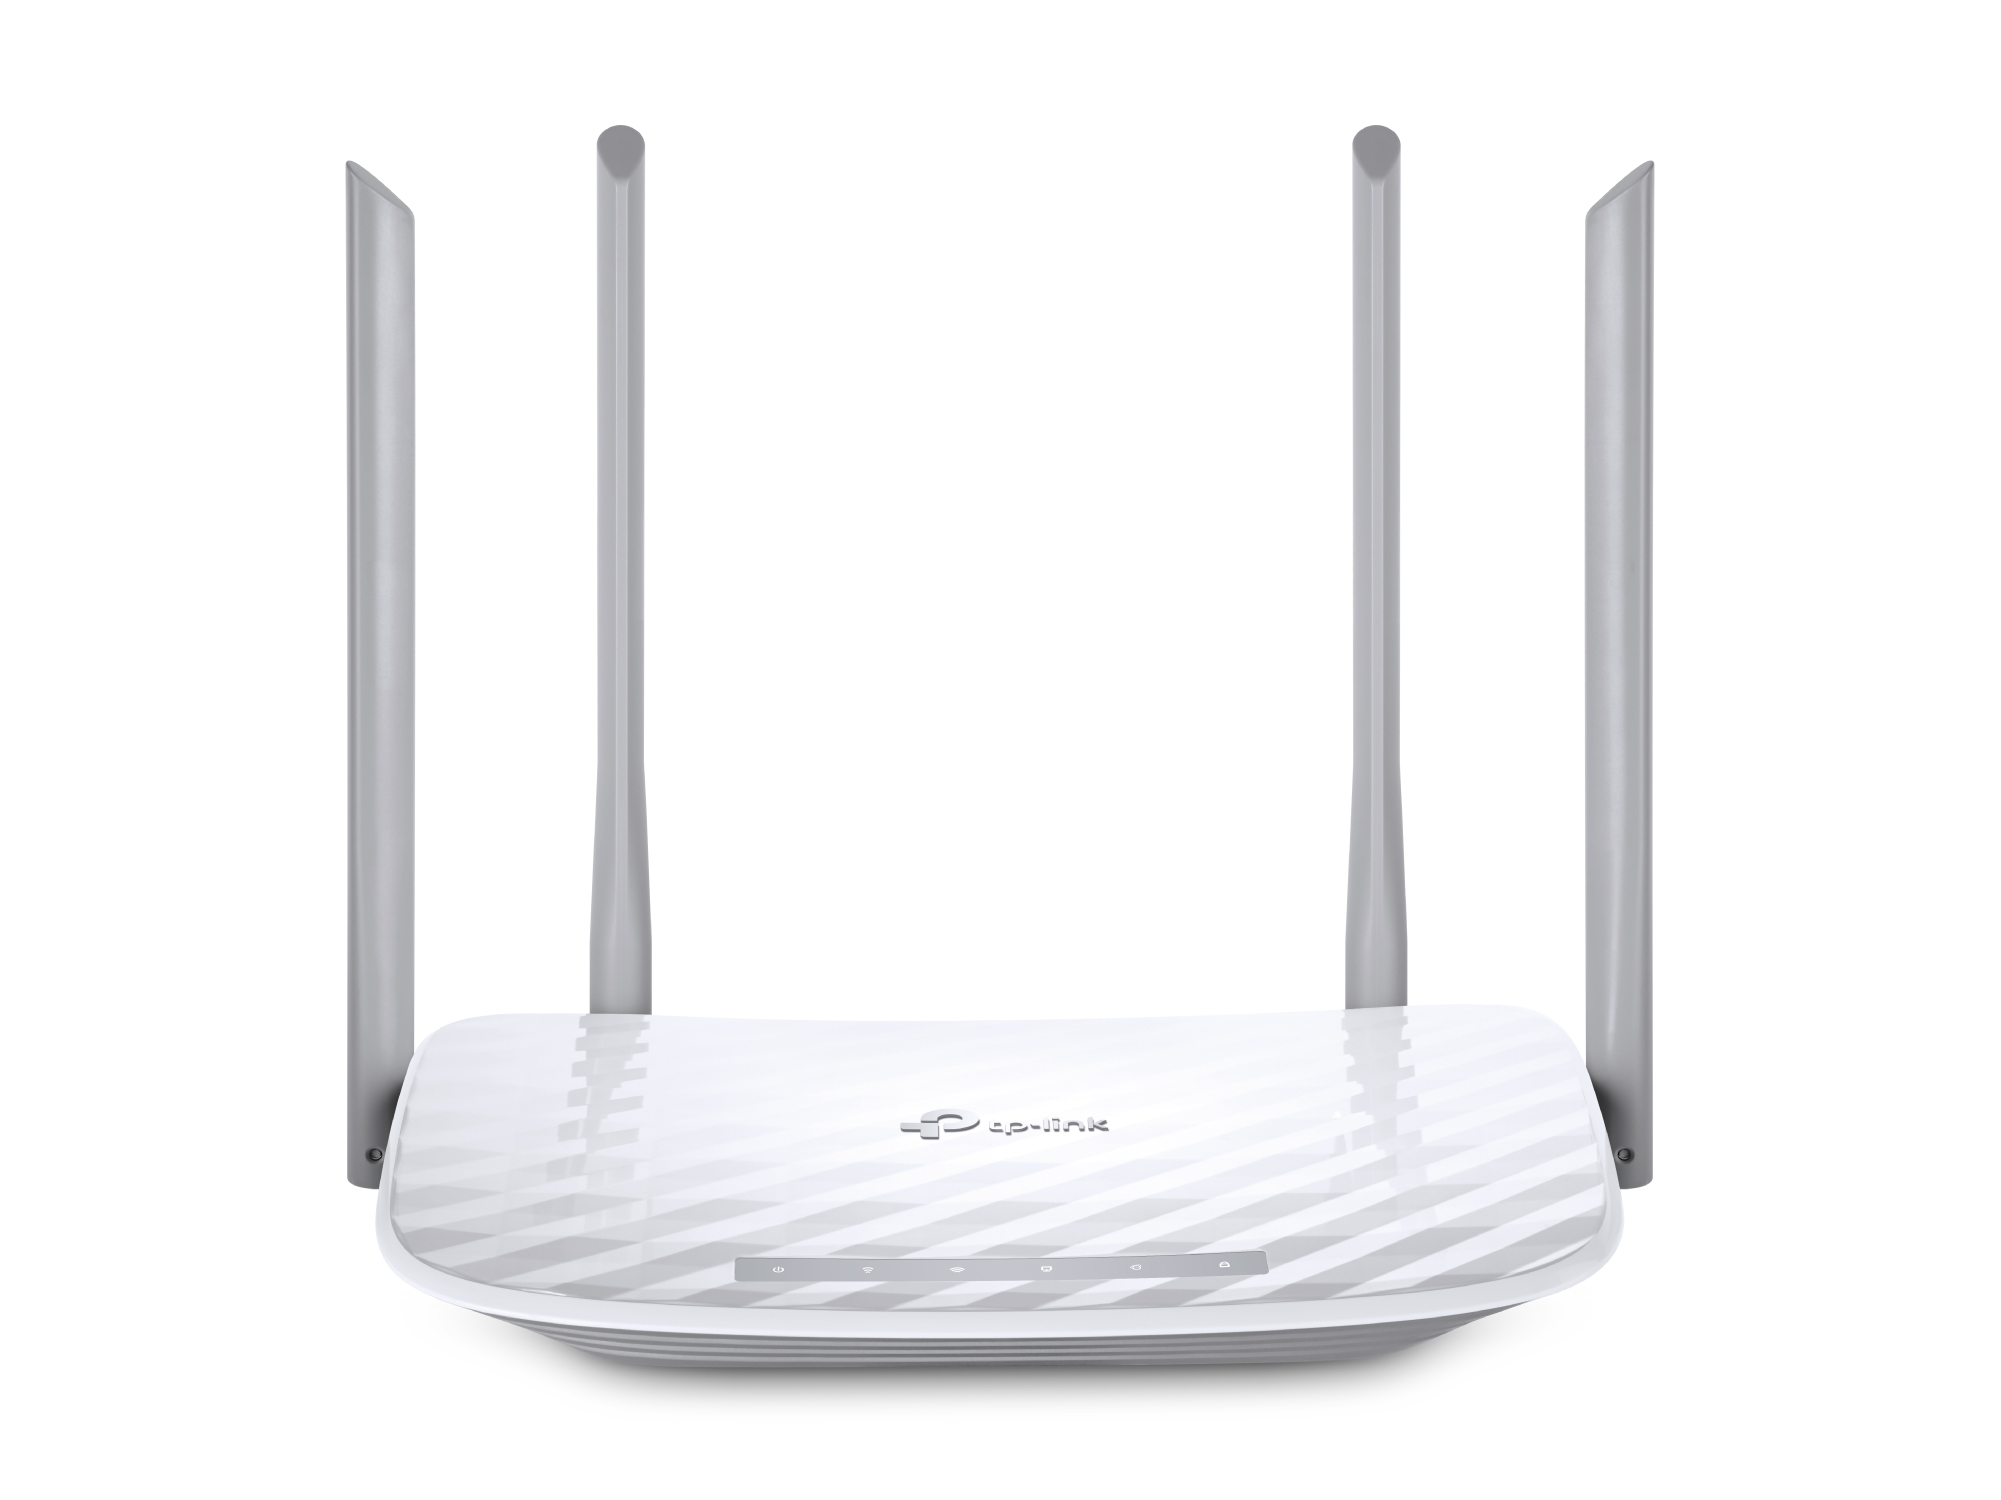 TP-Link Archer C50 V4 AC1200 WiFi DualBand Router0 